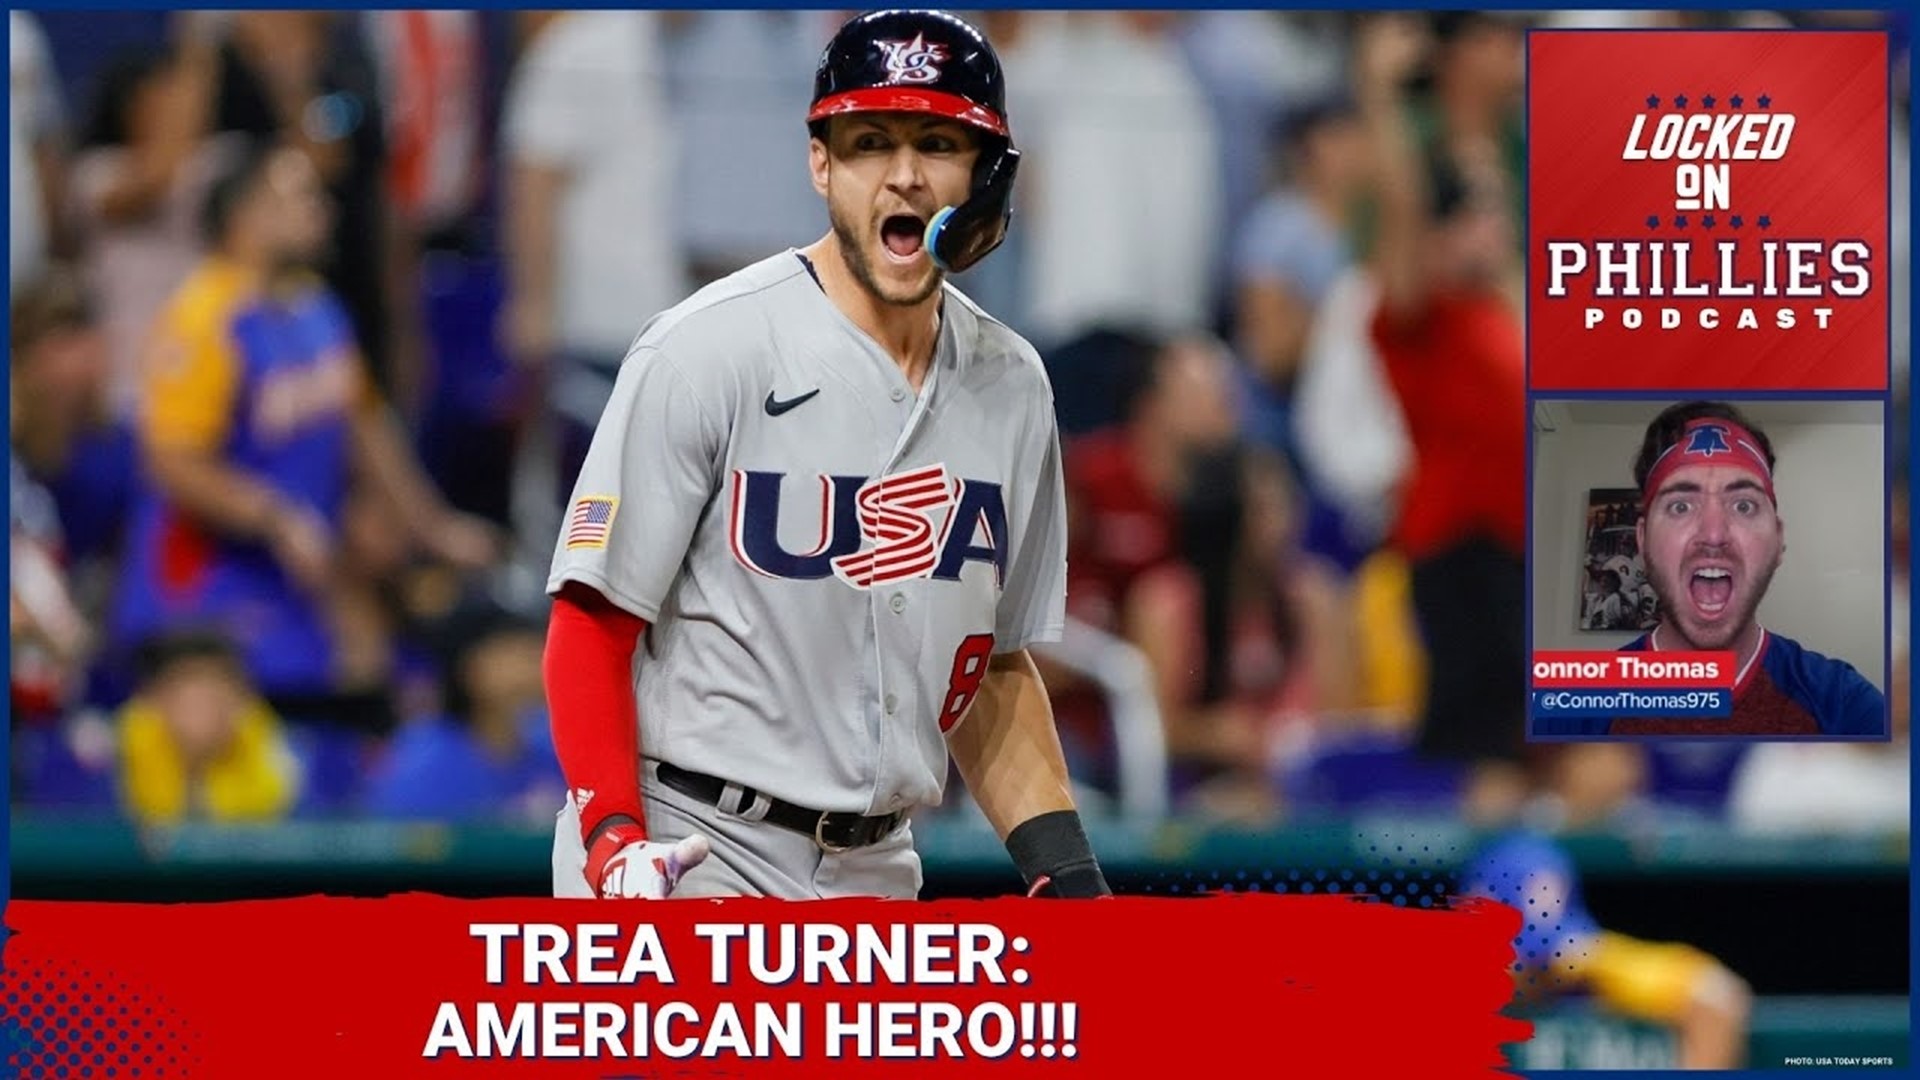 In today's episode, Connor recaps the heroics over the weekend by one of the newest members of the Philadelphia Phillies, shortstop Trea Turner.